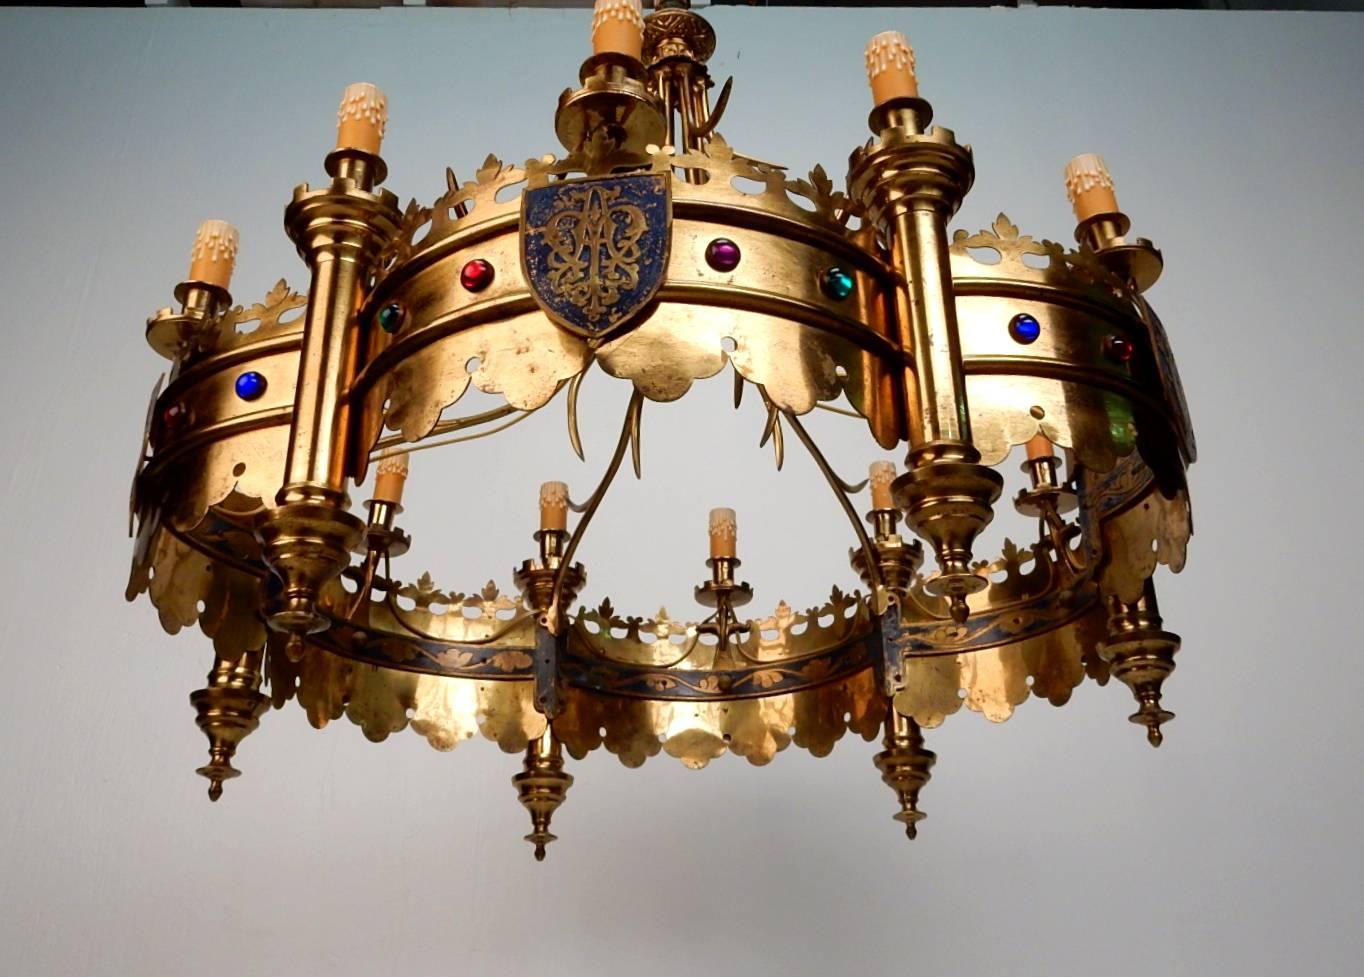 Incredible brass 12 bulb jeweled crown chandelier from France.
Heavy solid brass chandelier, hand formed with fantastic detail
including red, green and blue glass gems surrounding with enameled shields of flowers and design.
Began life as a